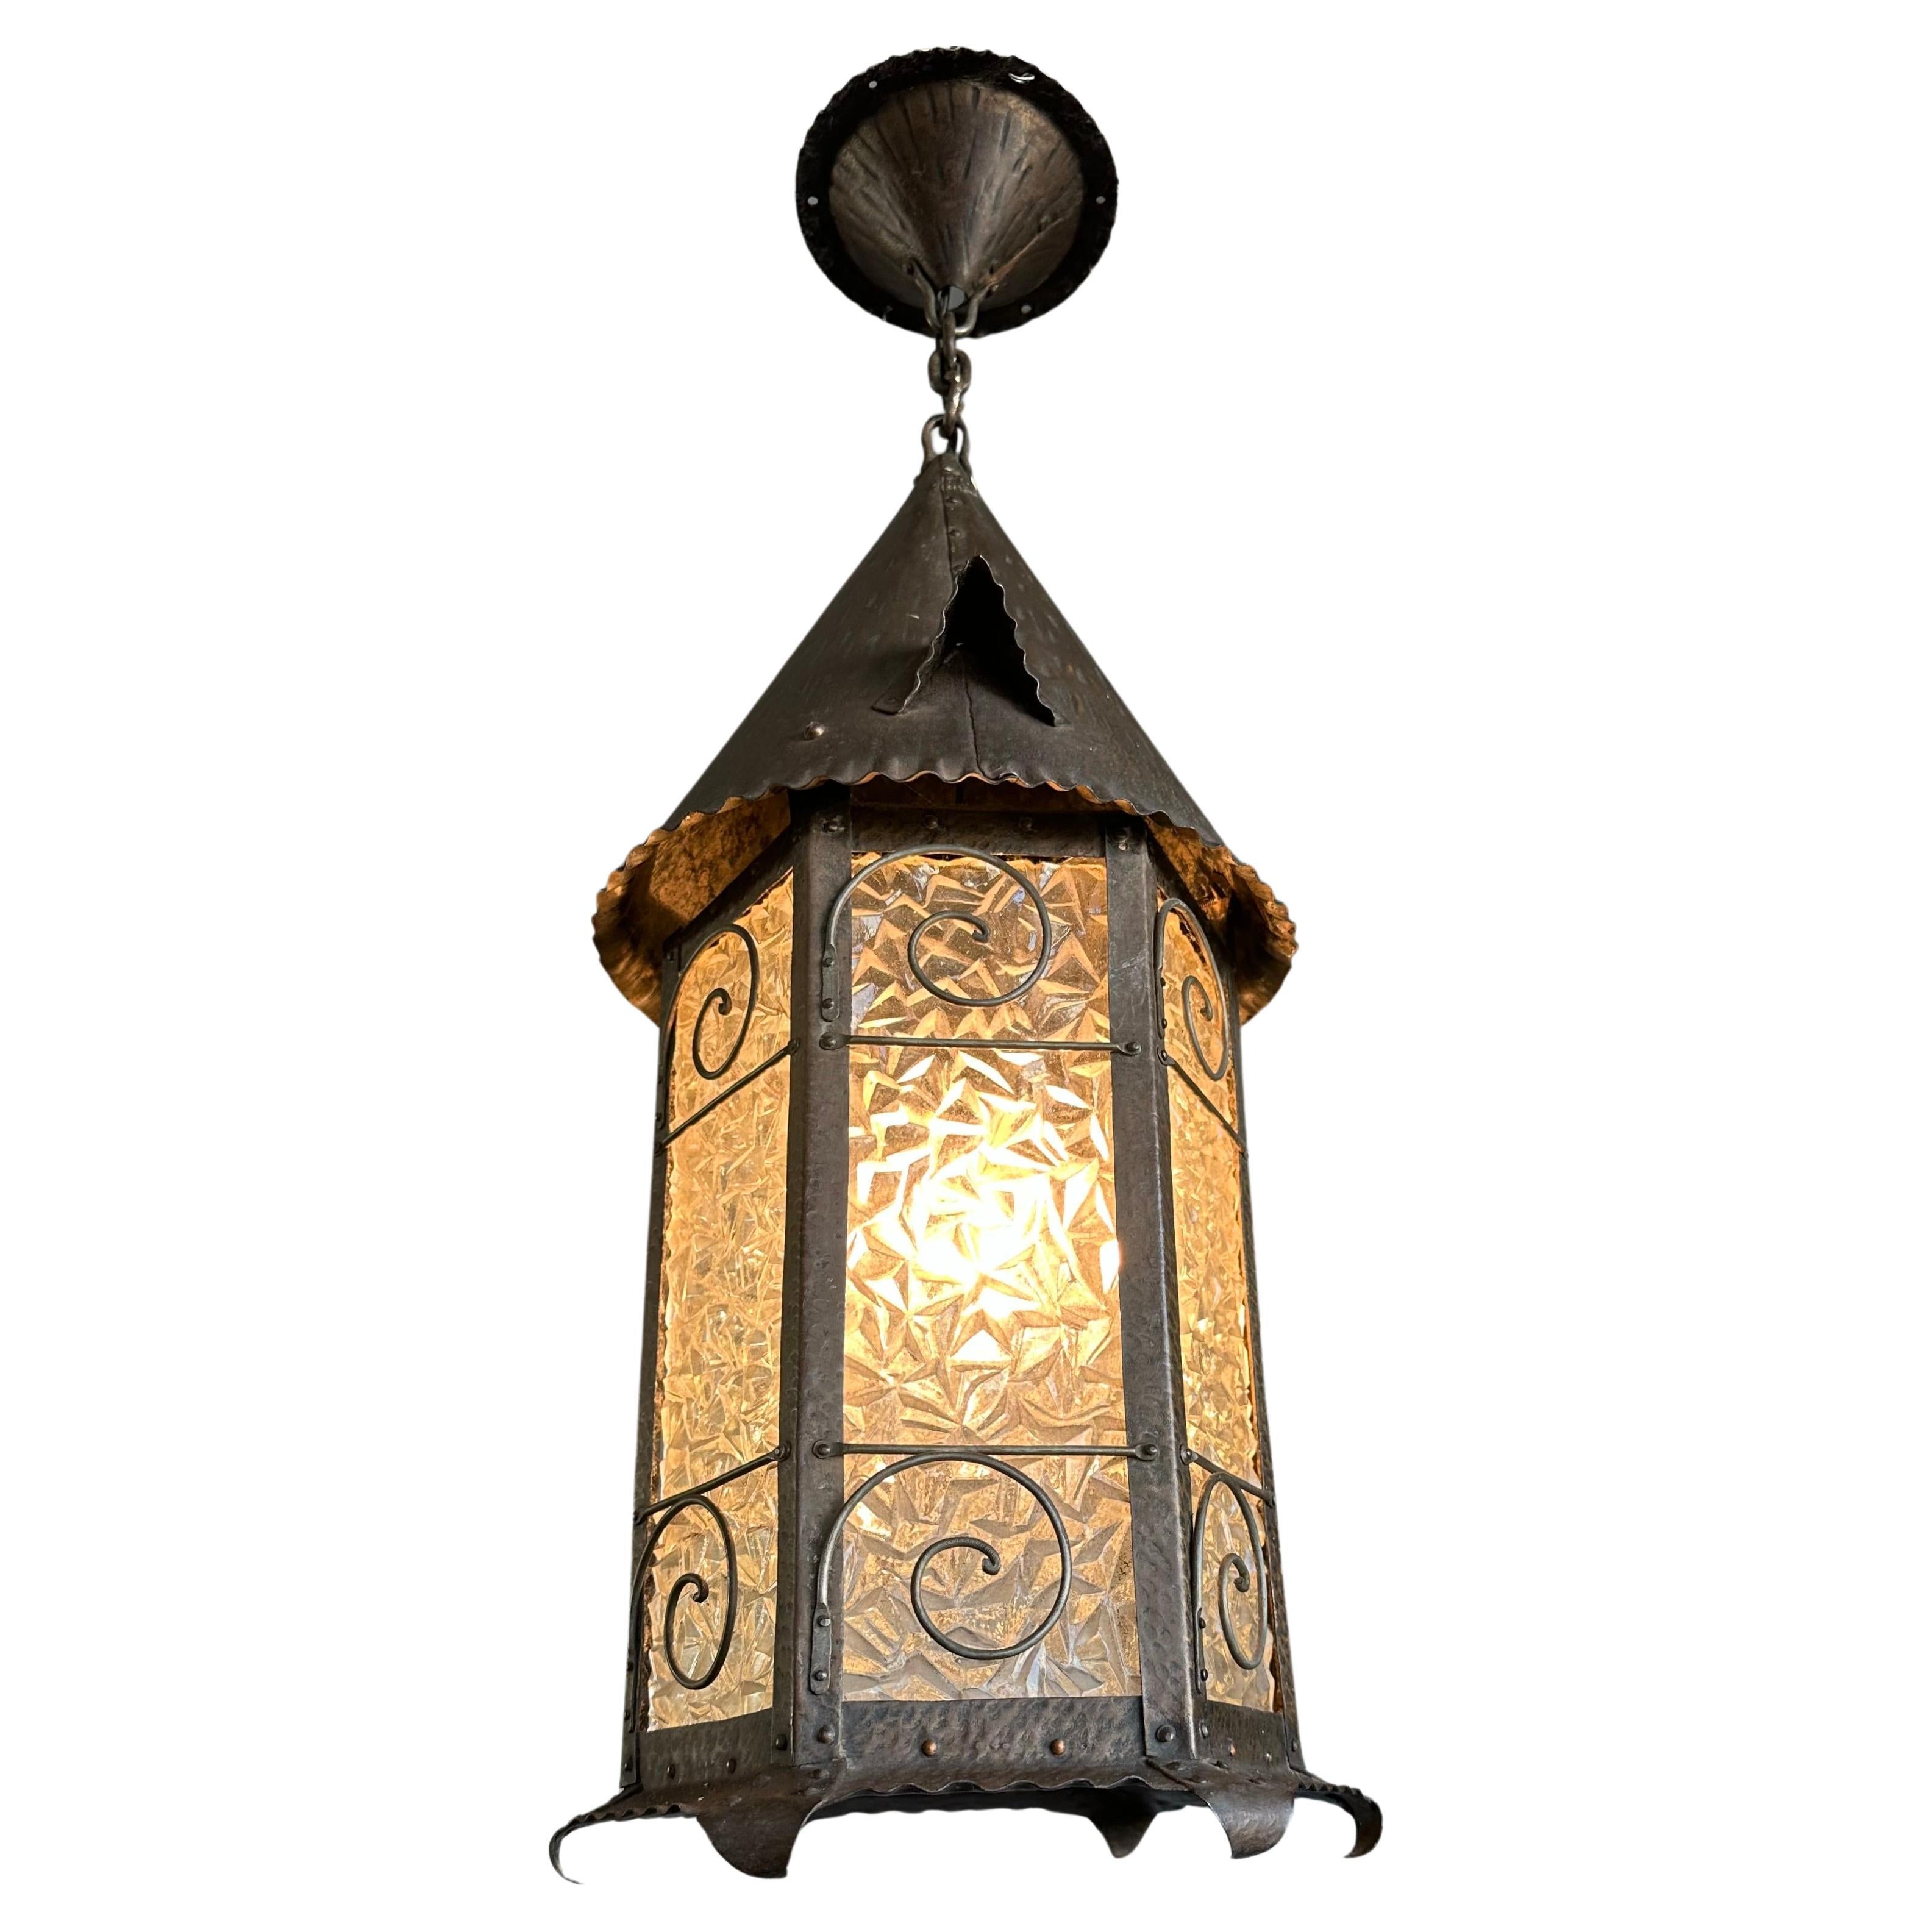 Antique and impressive, quality made light fixture.

If you are a collector of rare and all-handcrafted art and antiques then this sizable and one of a kind pendant could be flying your way soon. With antique light fixtures being one of our